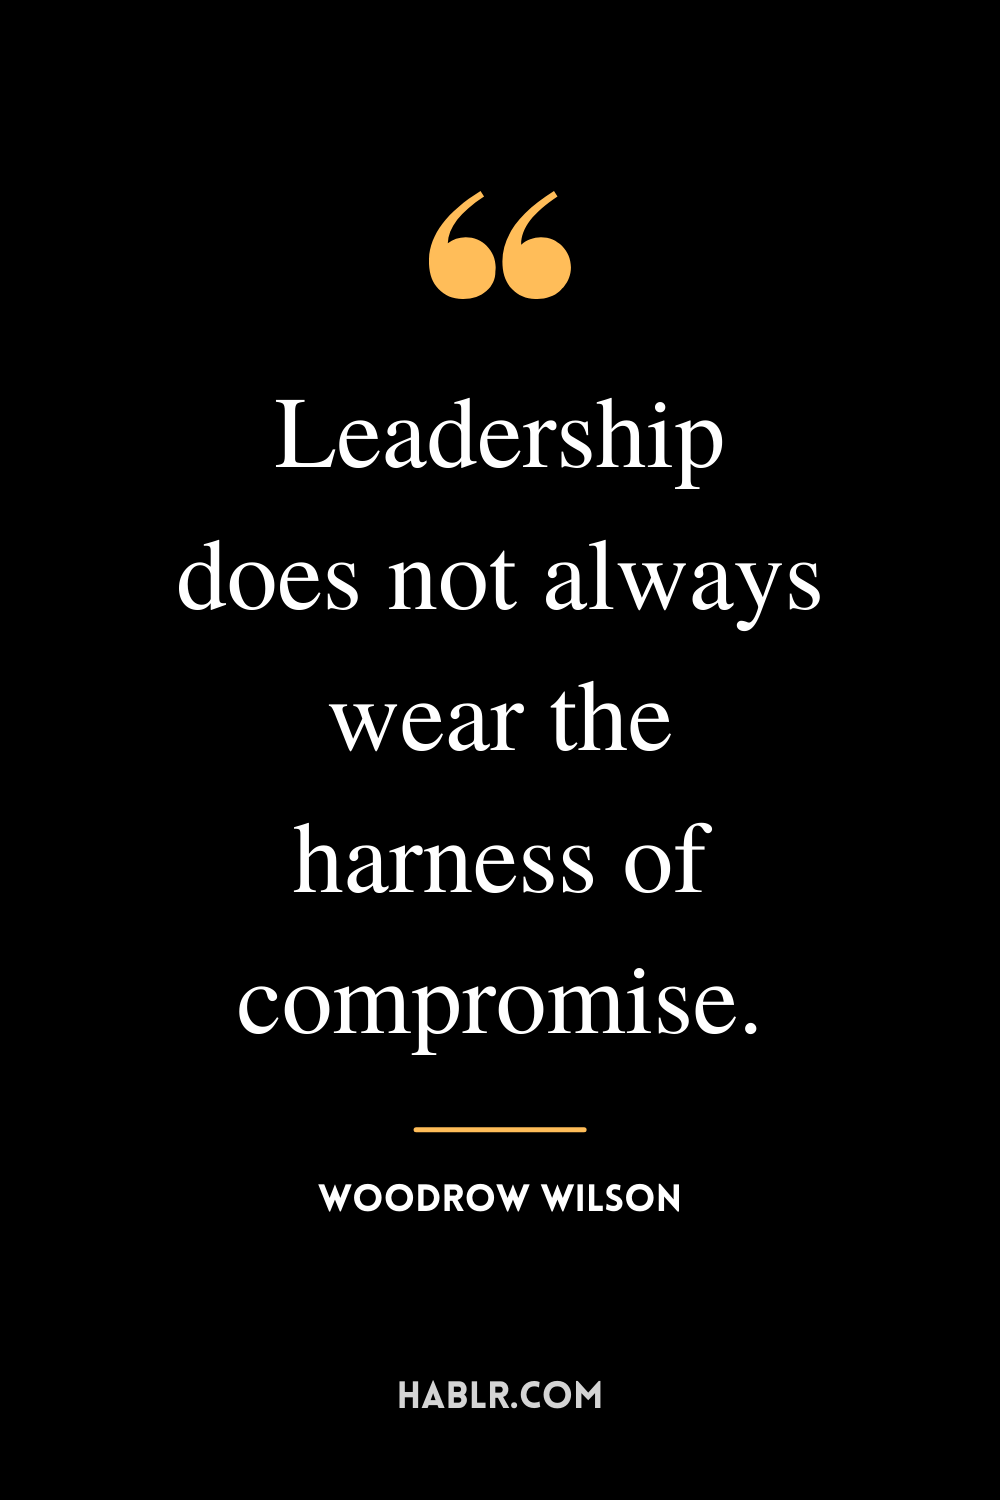 “Leadership does not always wear the harness of compromise.” -Woodrow Wilson